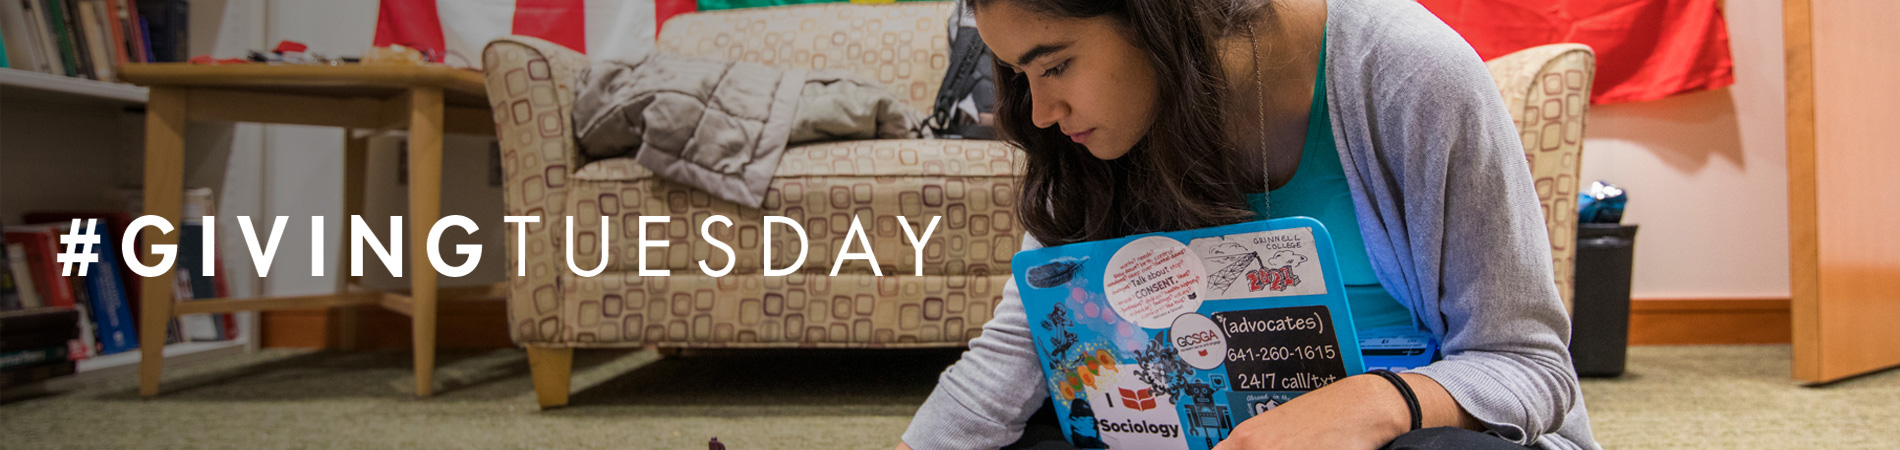 Image of Cinthia Romo '21 studying. Text: #Givingtuesday